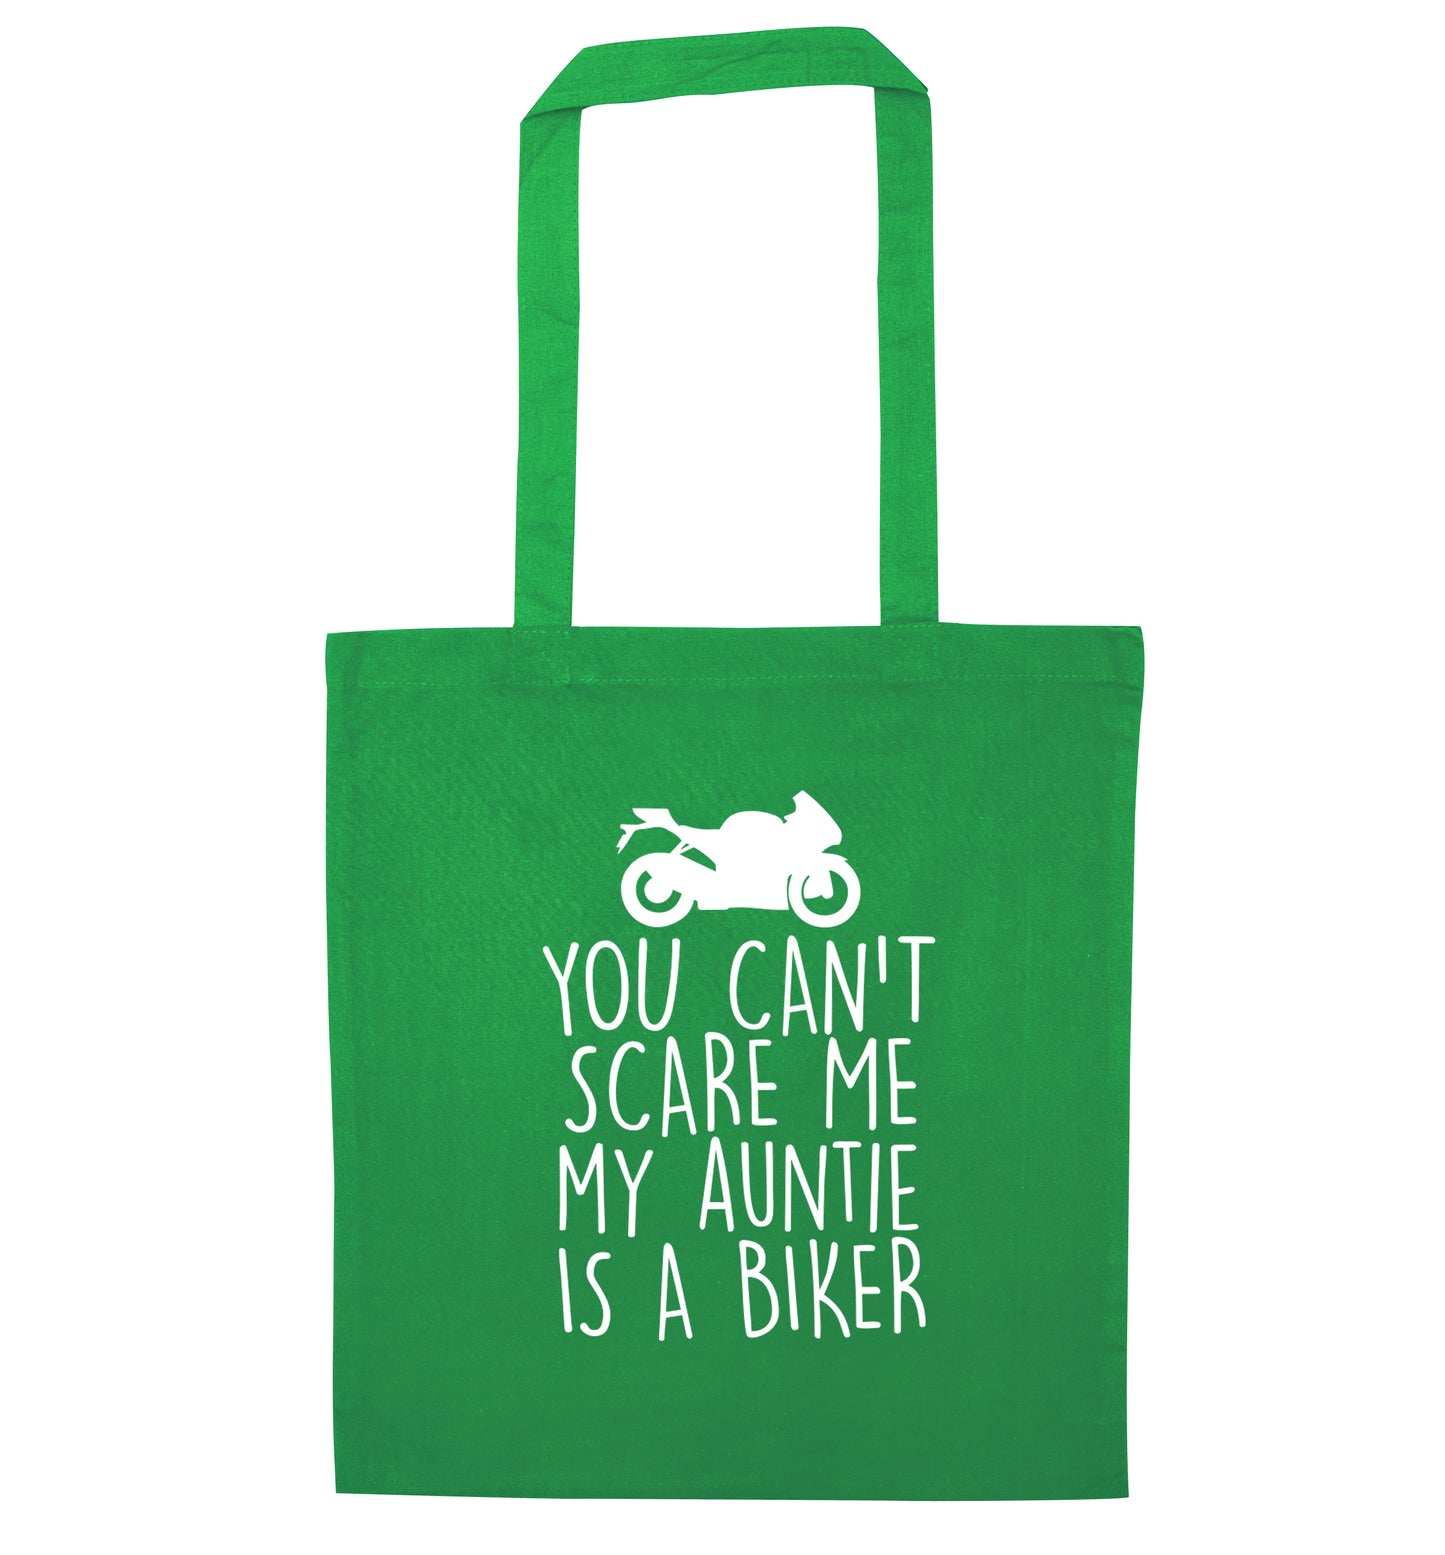 You can't scare me my auntie is a biker green tote bag